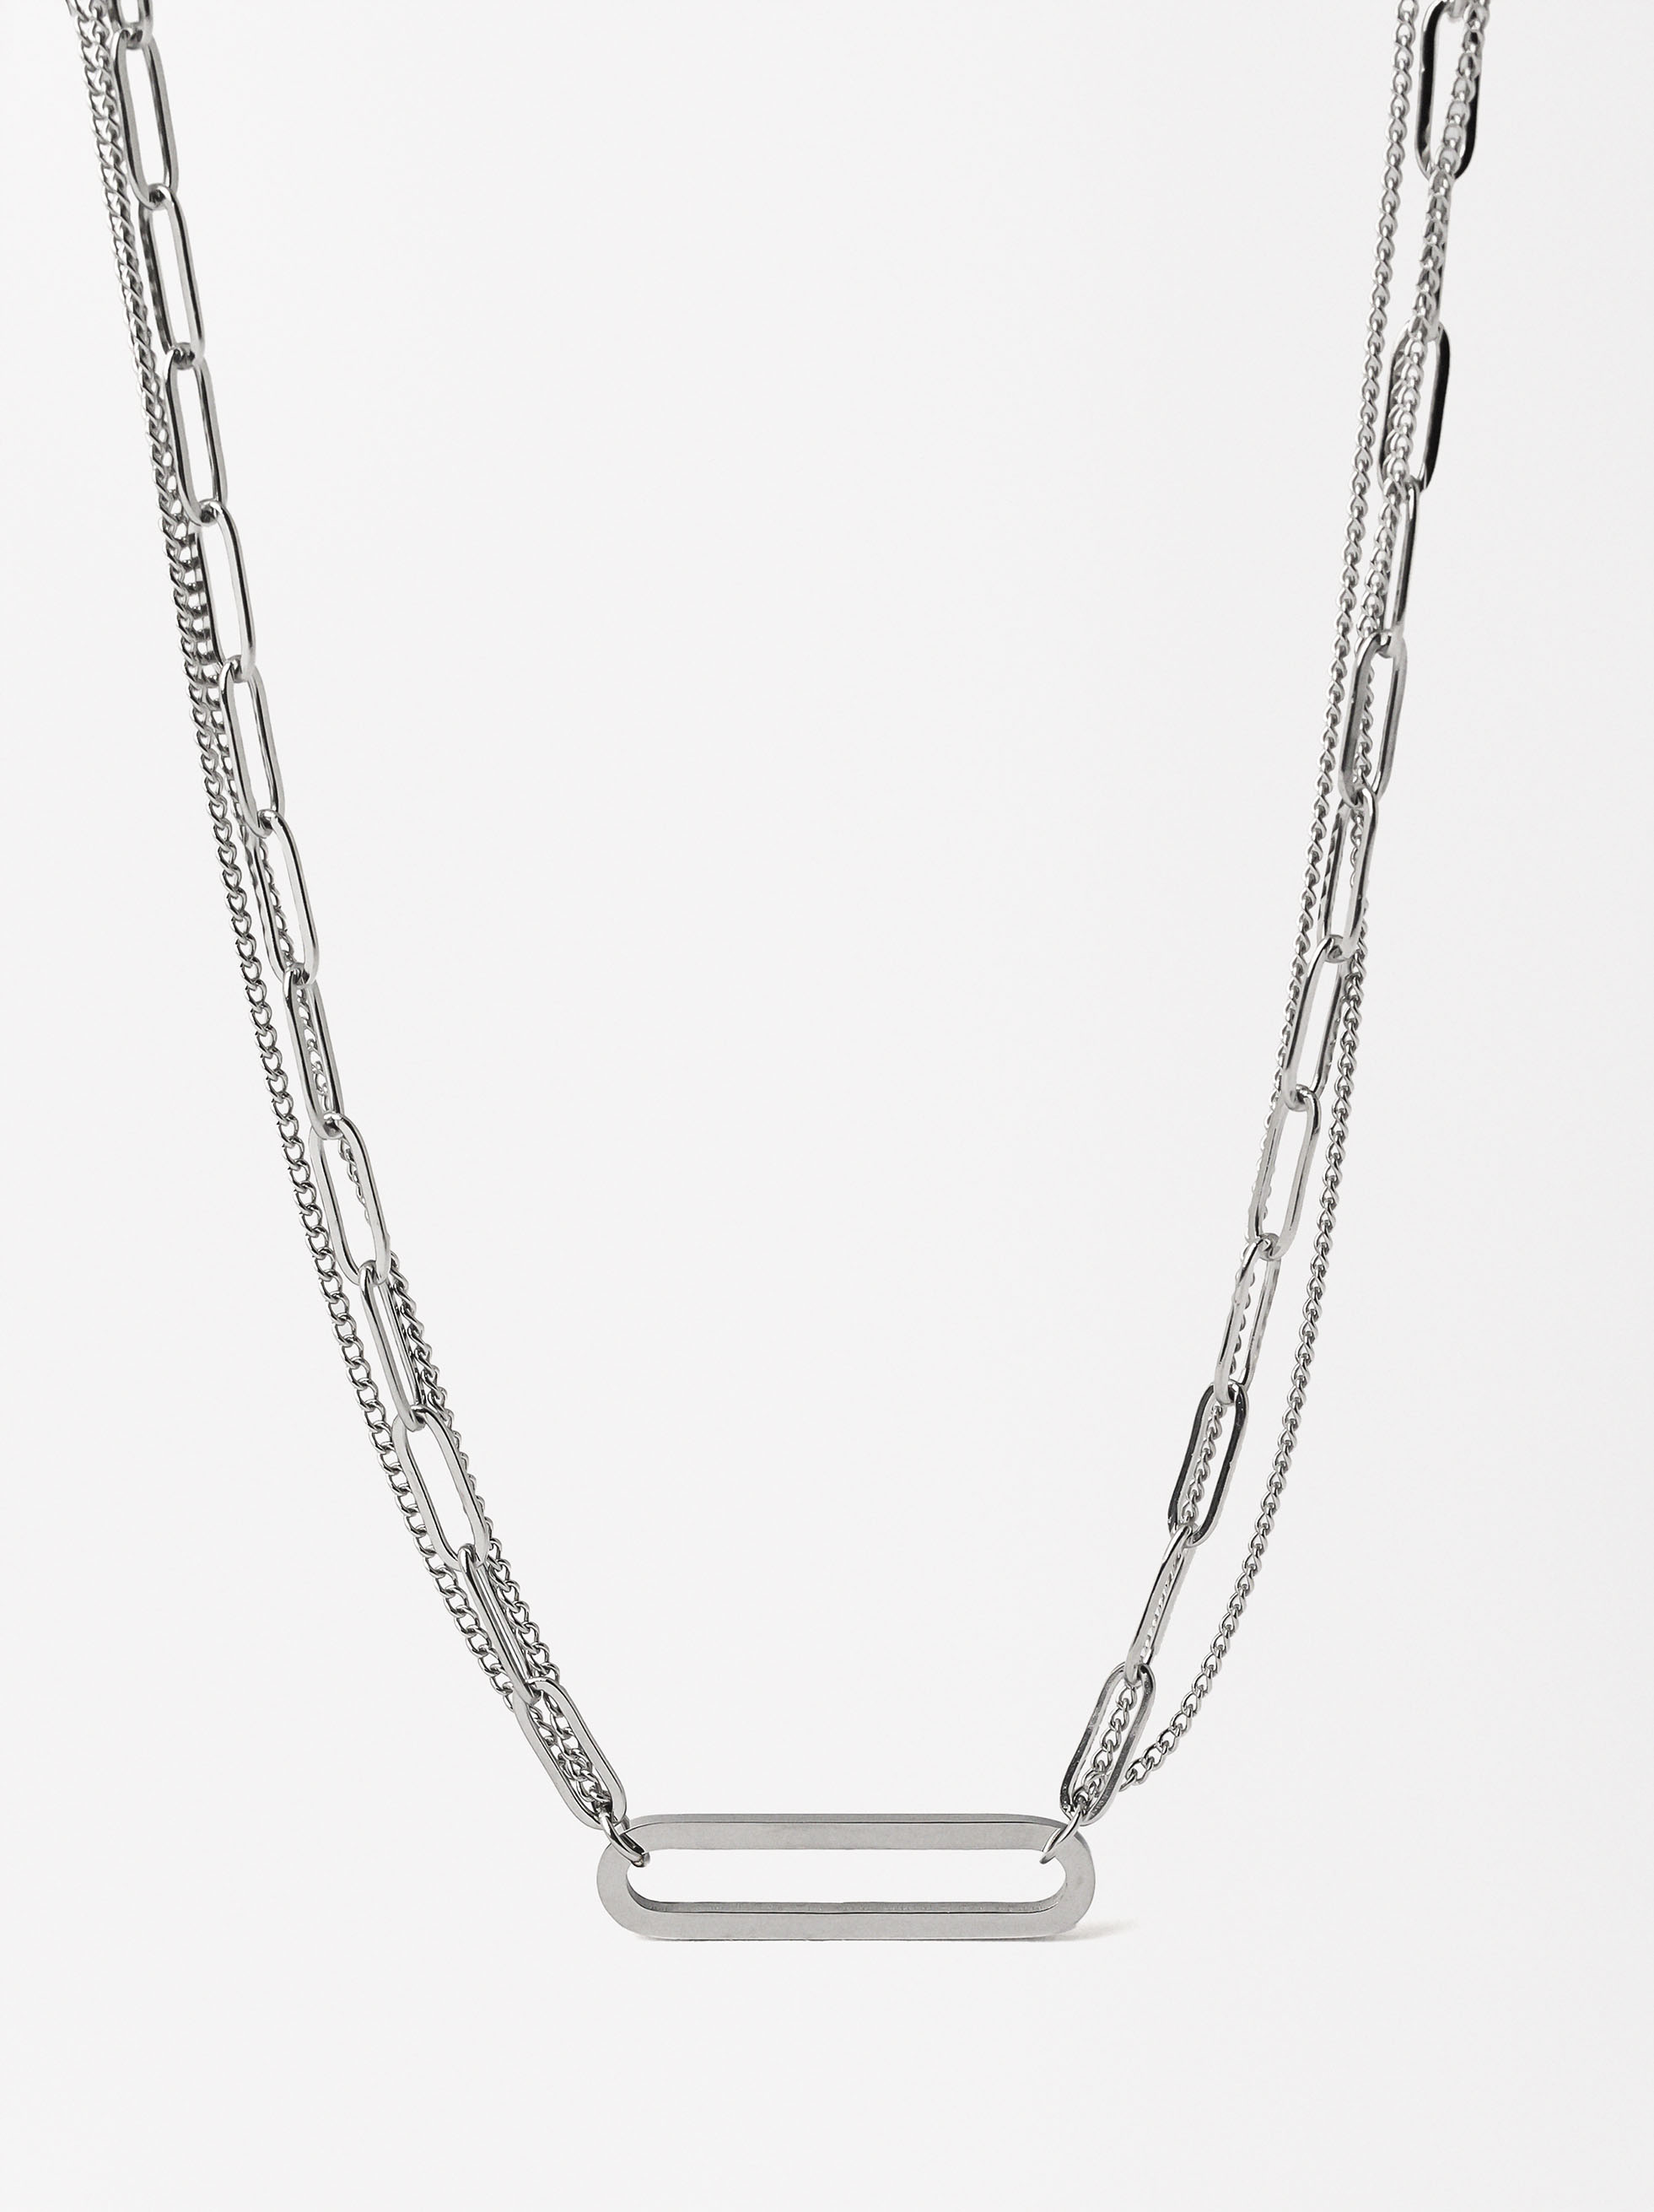 Necklace With Links - Stainless Steel image number 0.0